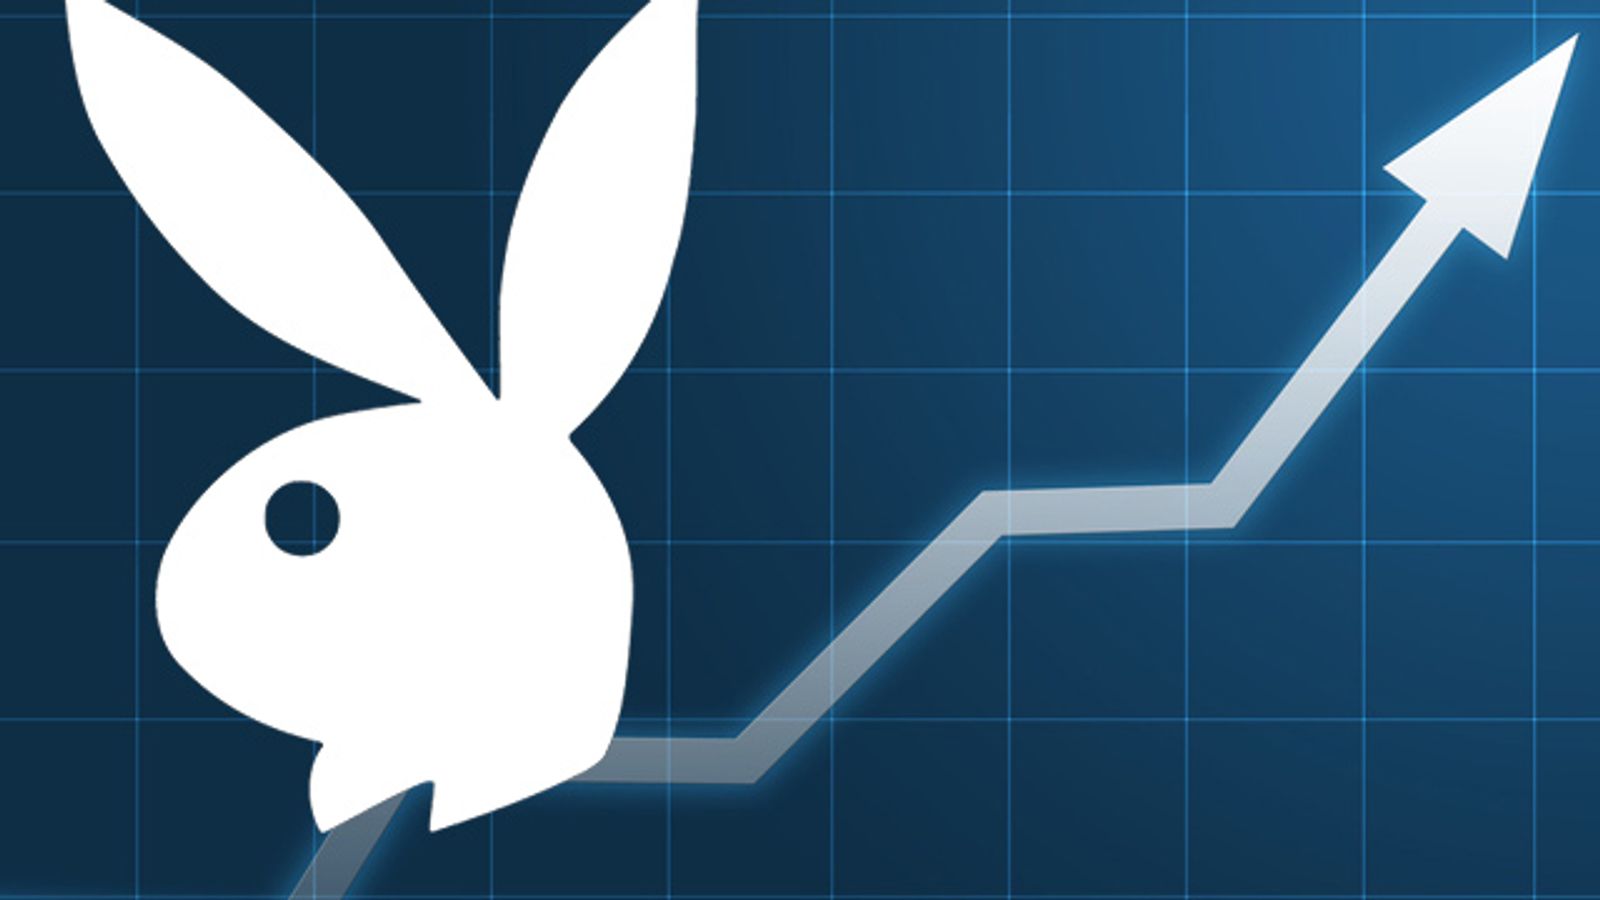 Playboy Up, Iconix Down on Rumors of Sale